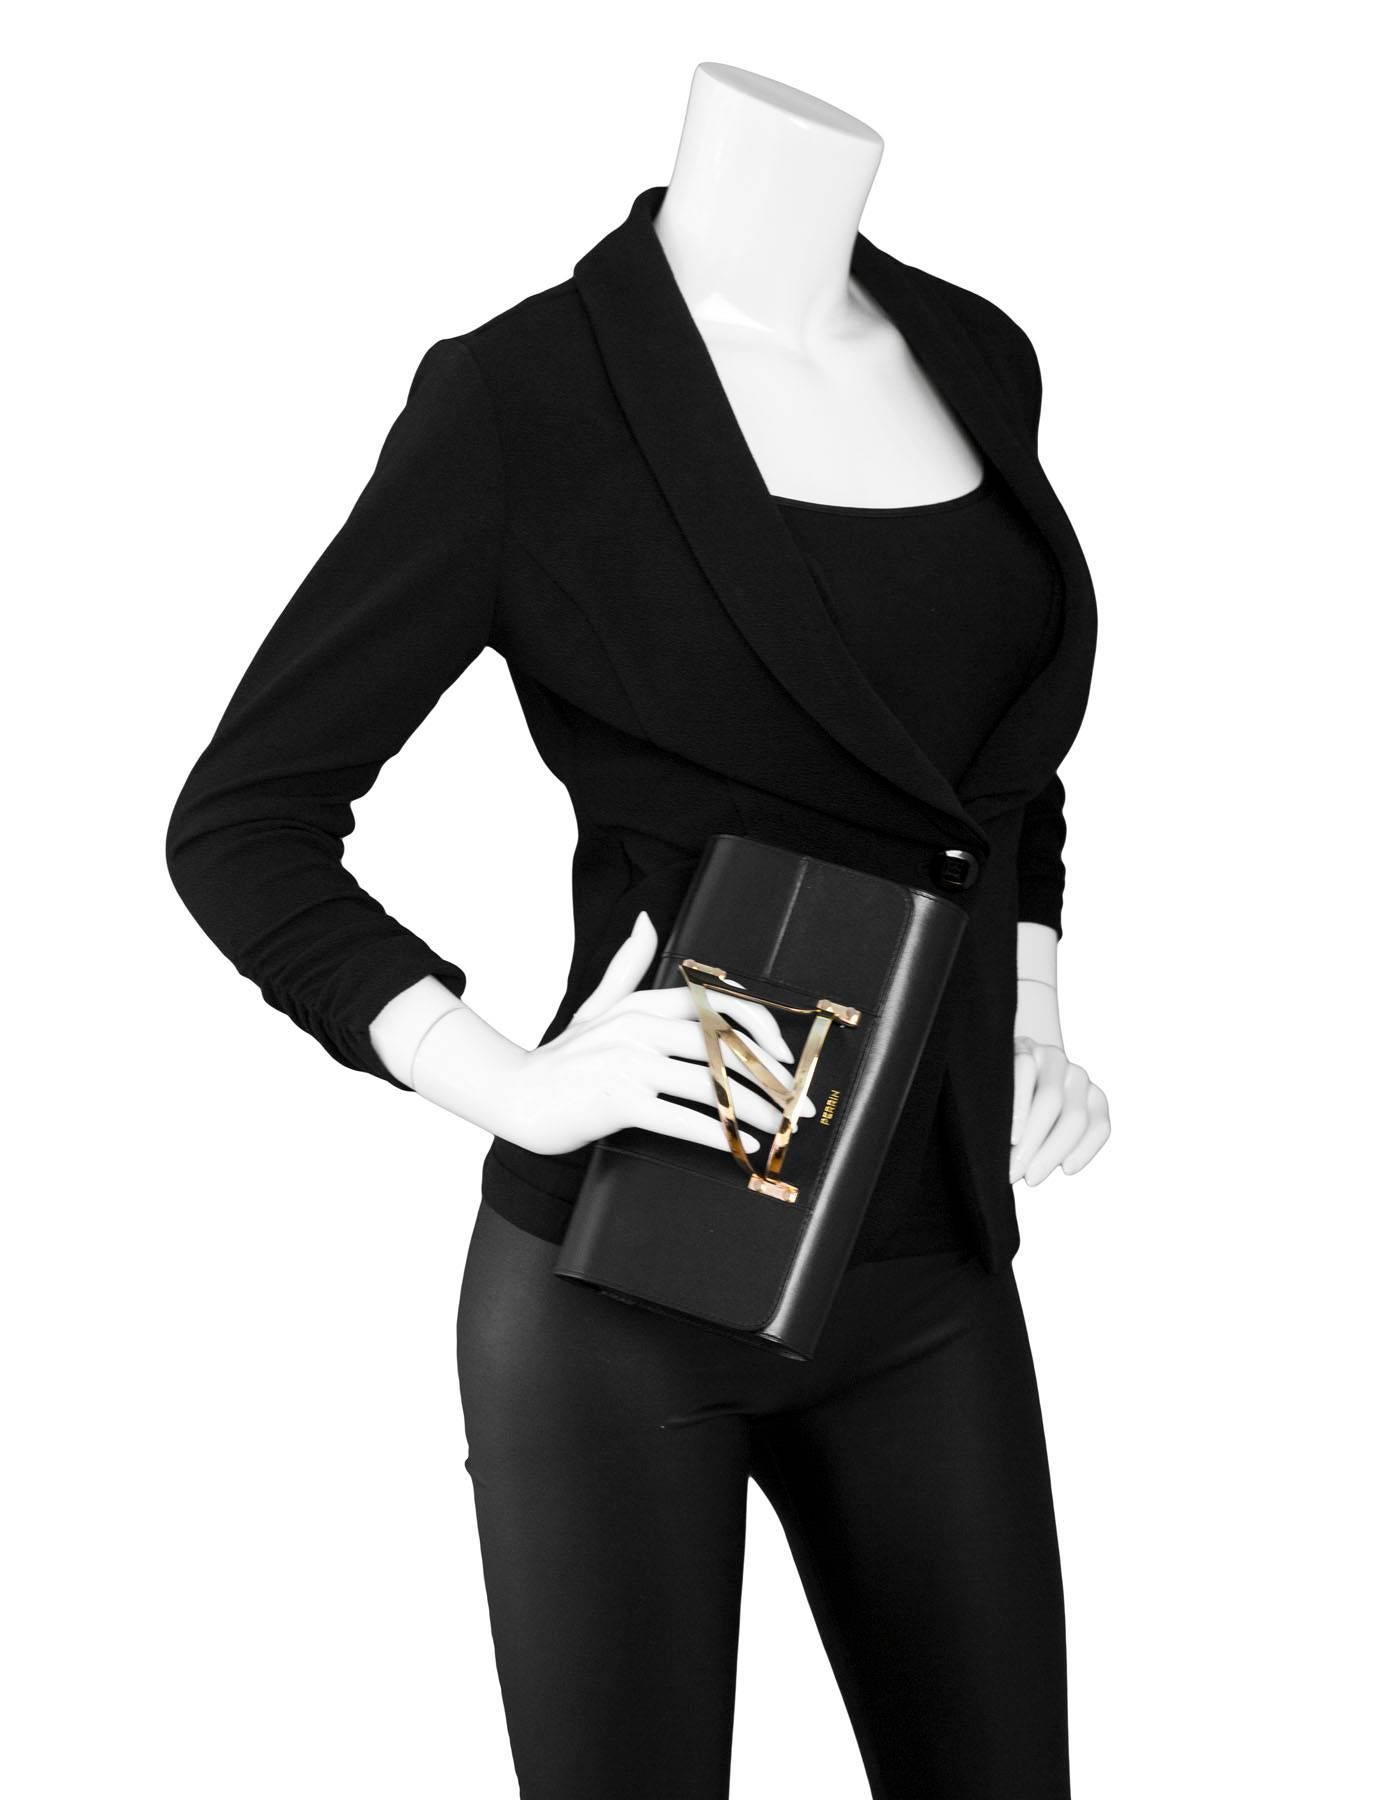 Perrin Black Leather L'Eiffel Cage Glove Clutch

To be worn with right hand

Color: Black, gold
Materials: Leather, metal
Lining: Black lambskin leather
Closure/opening: Flap top with magnetic closure
Exterior Pockets: None
Interior Pockets: One